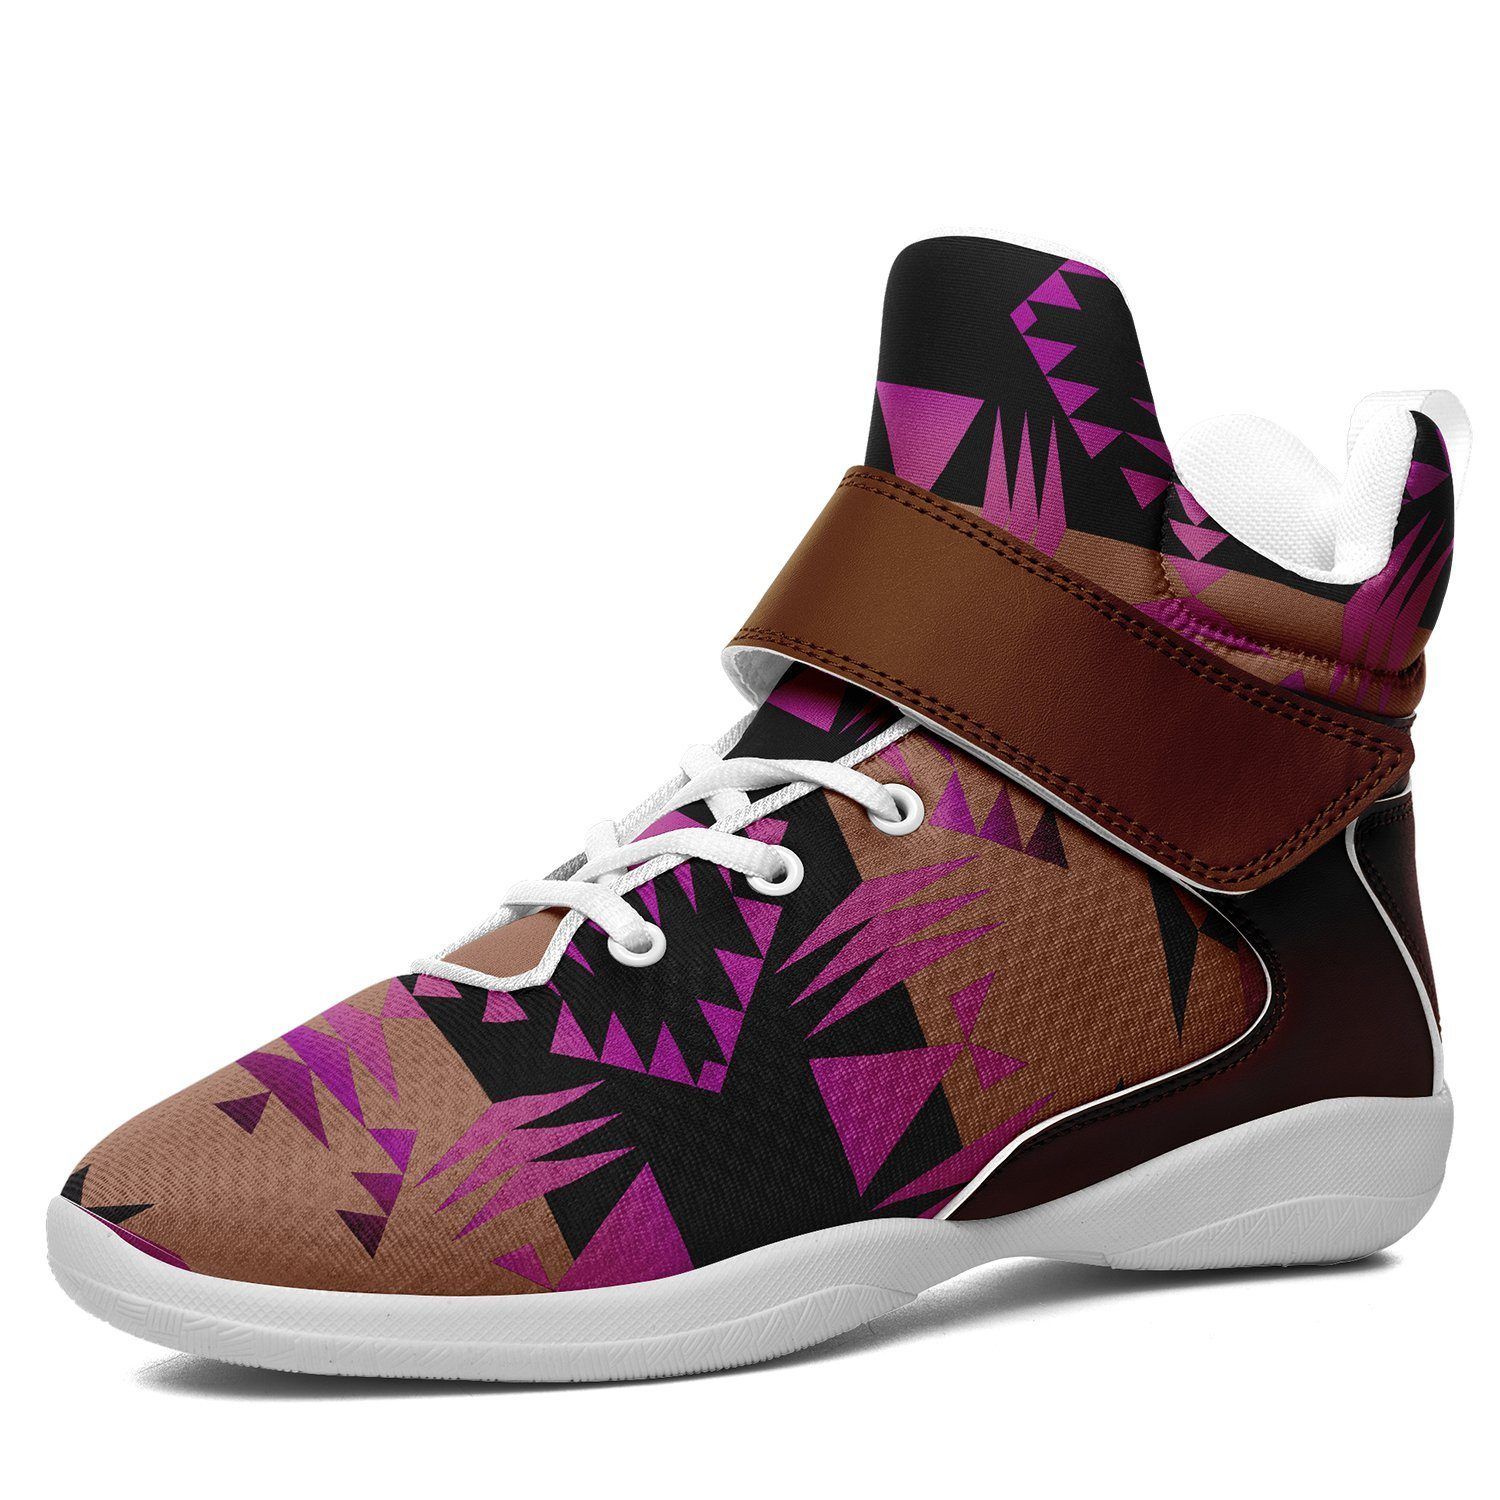 Between the Mountains Berry Ipottaa Basketball / Sport High Top Shoes - White Sole 49 Dzine US Men 7 / EUR 40 White Sole with Brown Strap 